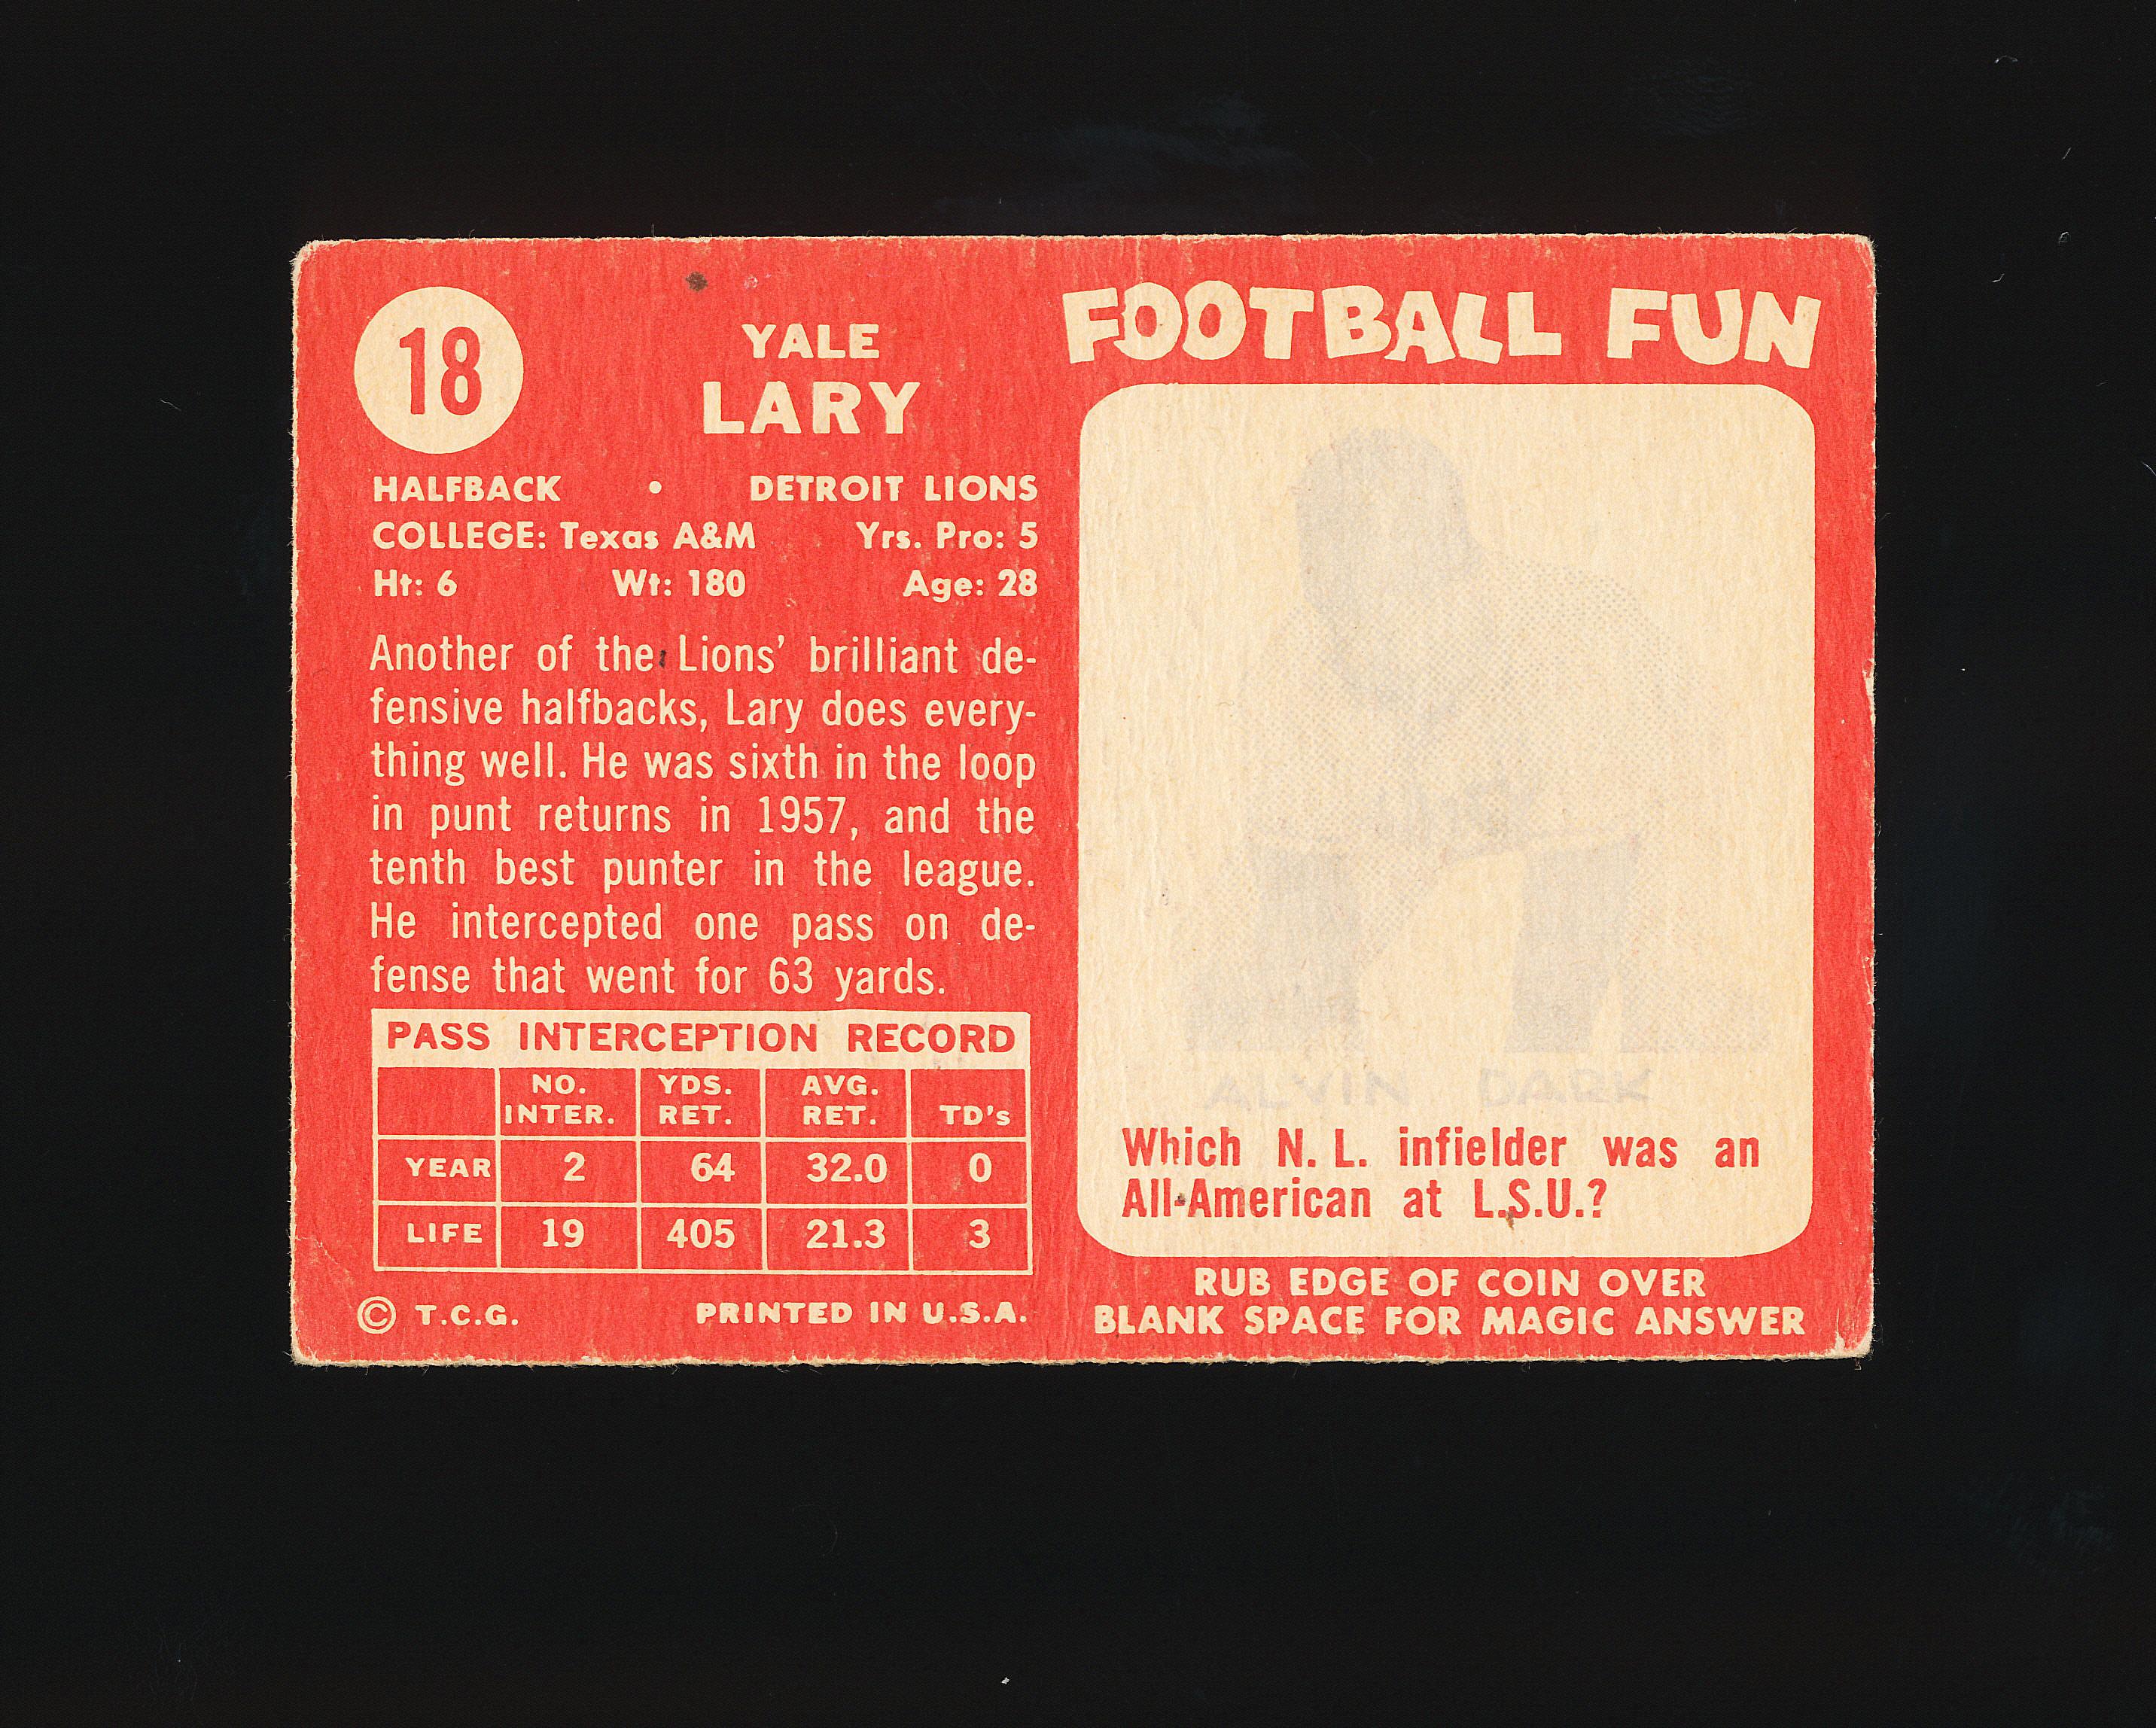 1958 Topps Football Card #18 Hall of Famer Yale Lary Detroit Lions